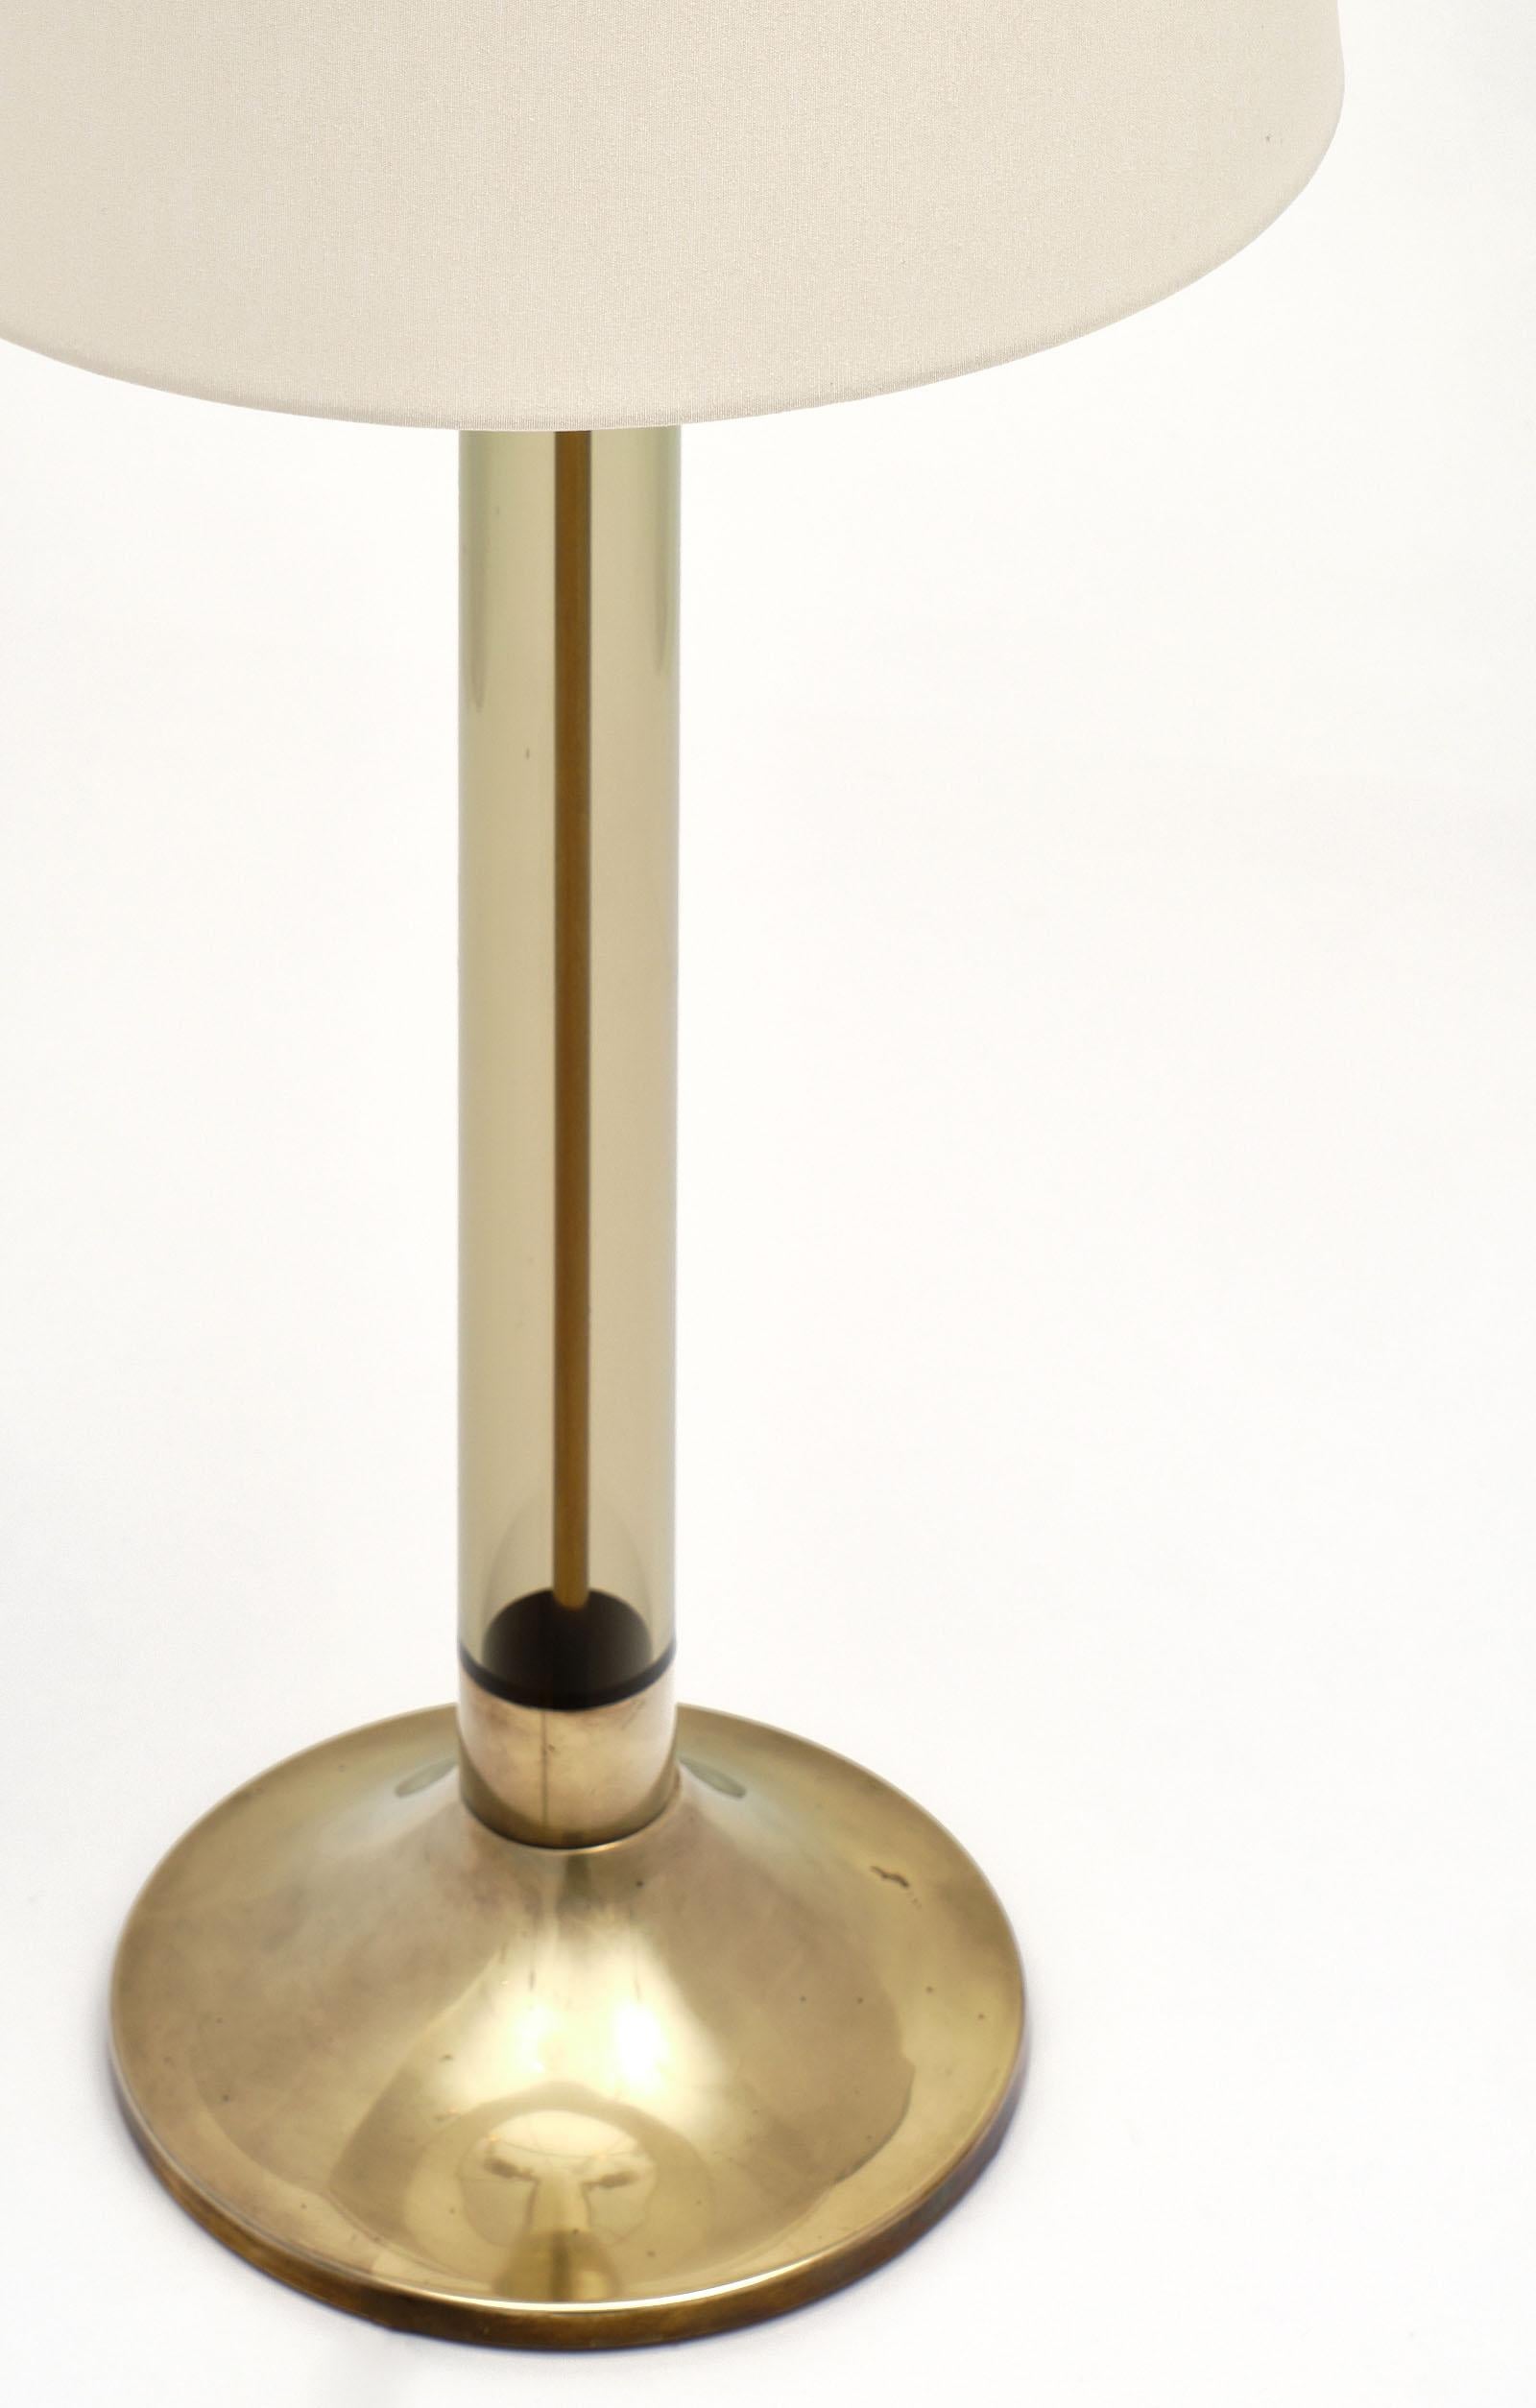 Midcentury Italian brass and Lucite lamp from Turin, Italy. This piece has a beautiful brass base with a smoked Lucite body. It requires two medium light bulbs and has been newly wired to US standards.